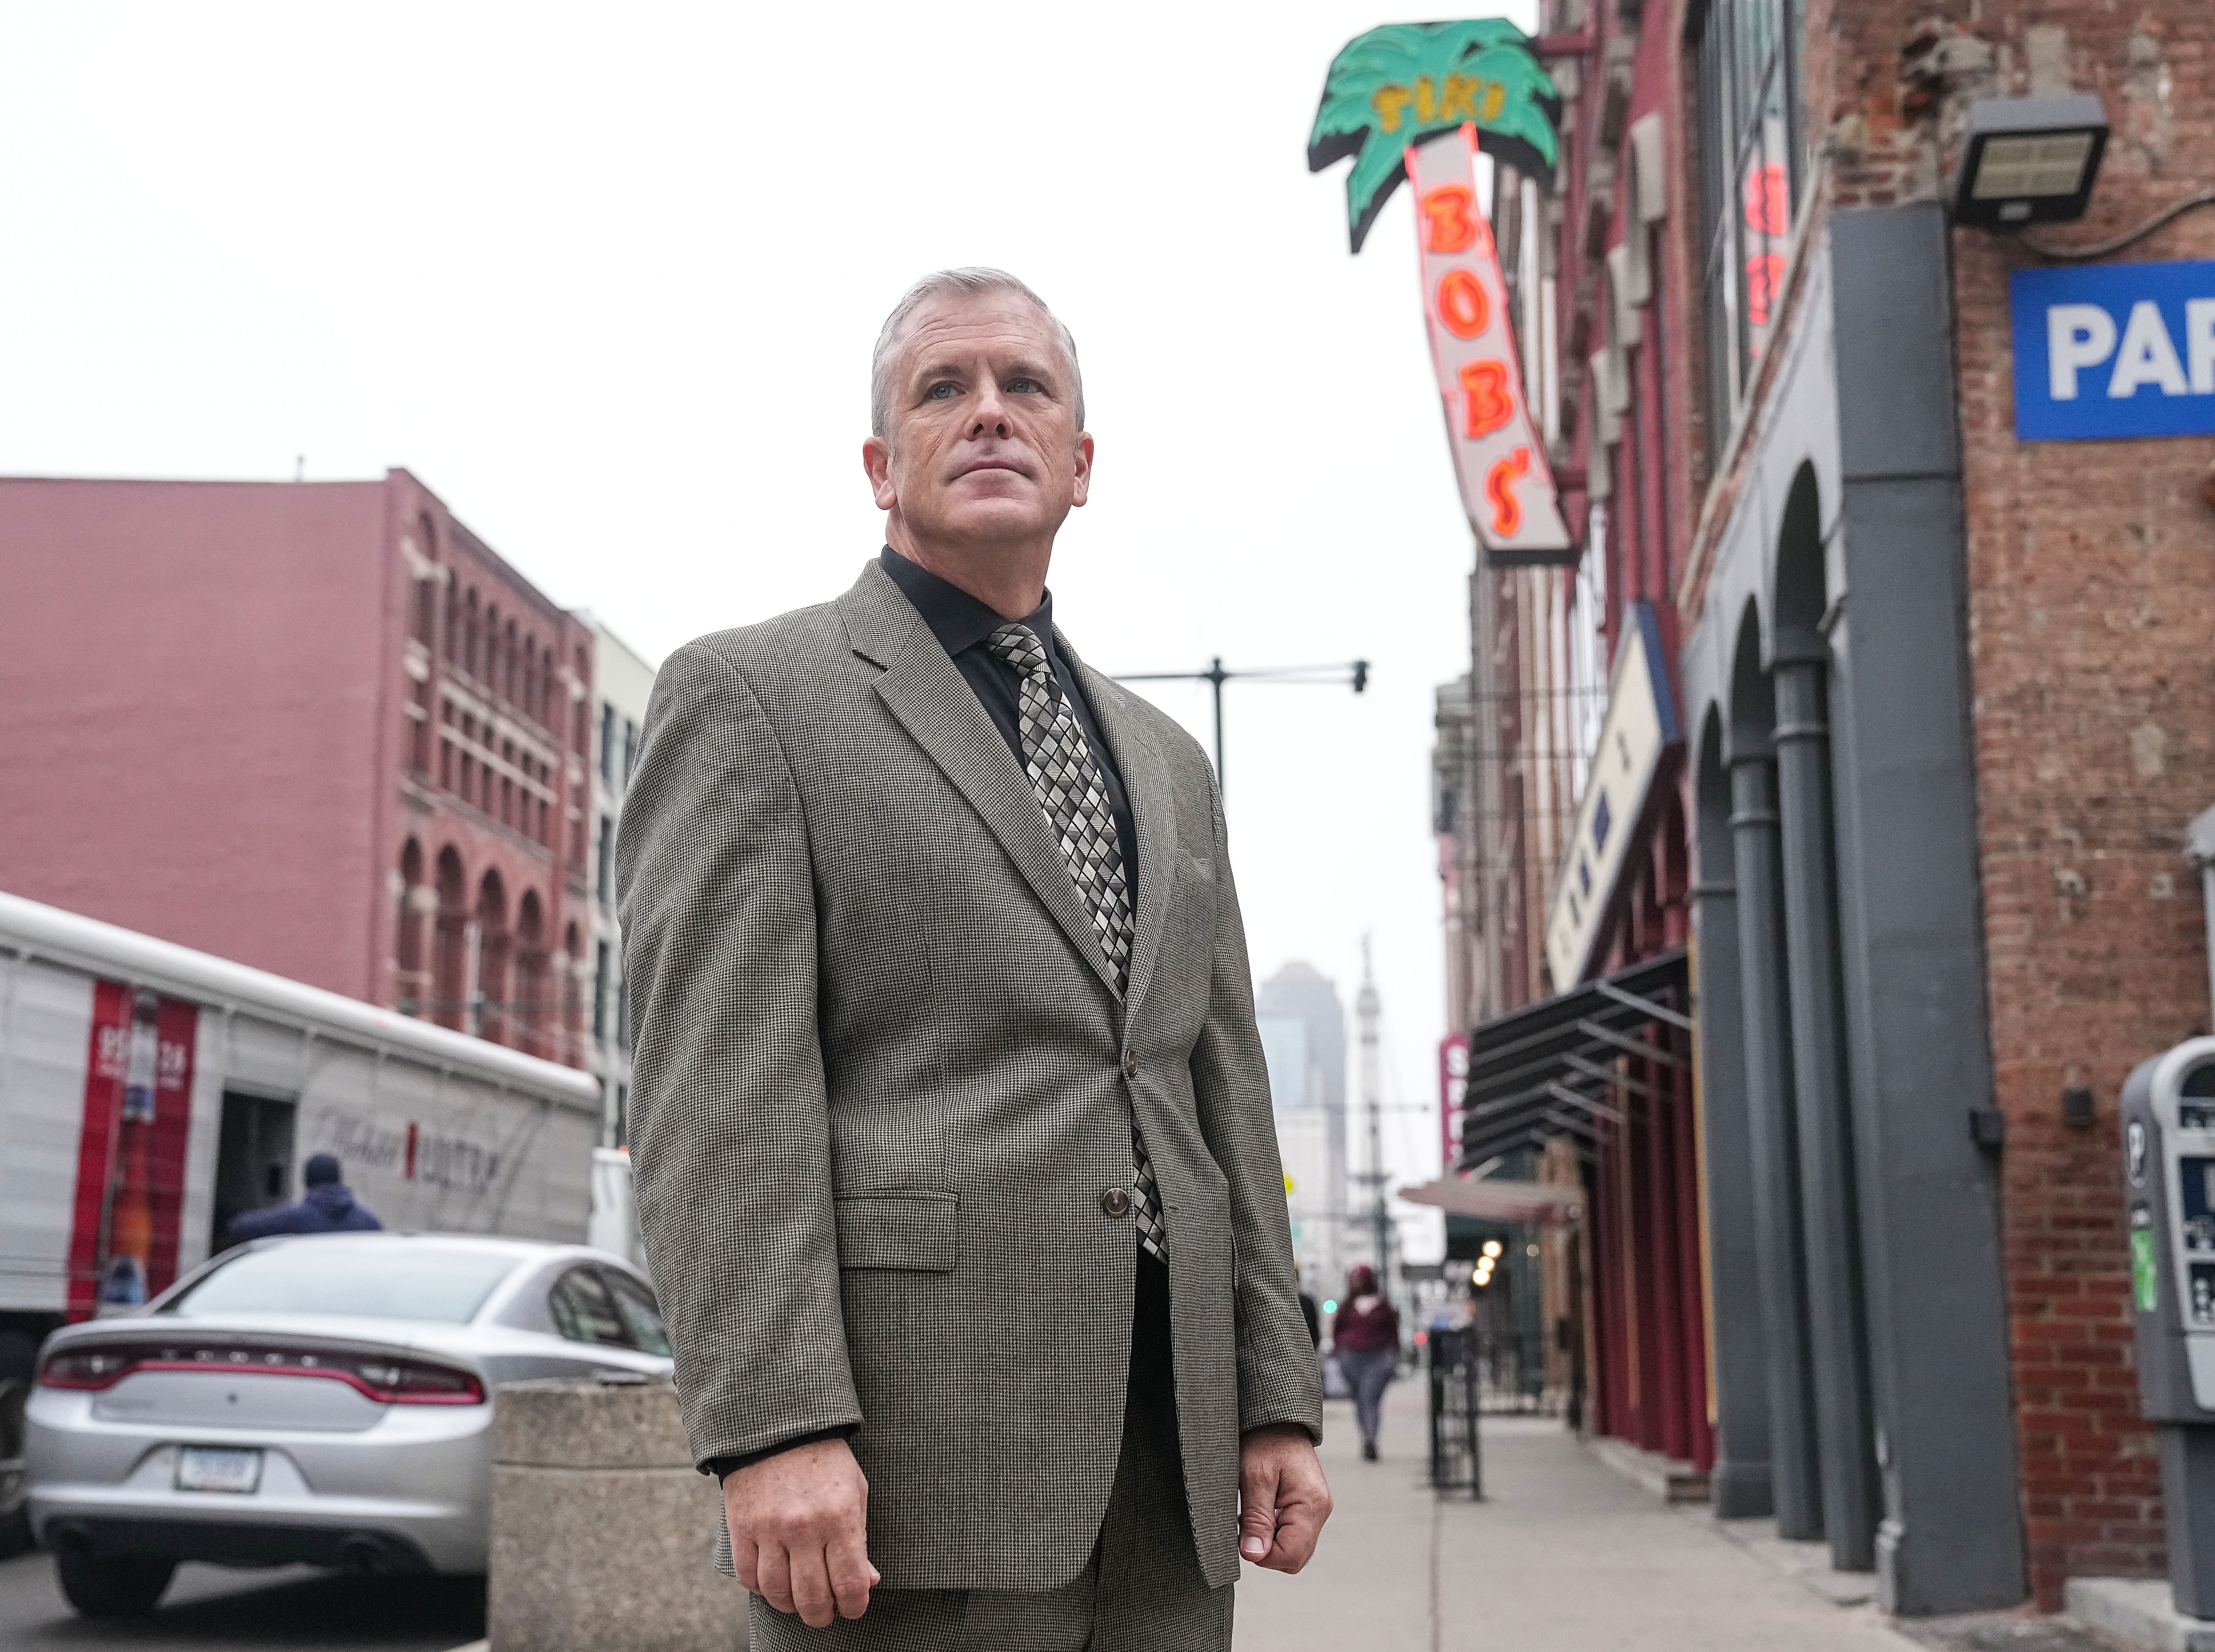 IMPD Capt. Christopher Boomershine leads the department's efforts to crack down on violence and other problems at Indianapolis bars and clubs.